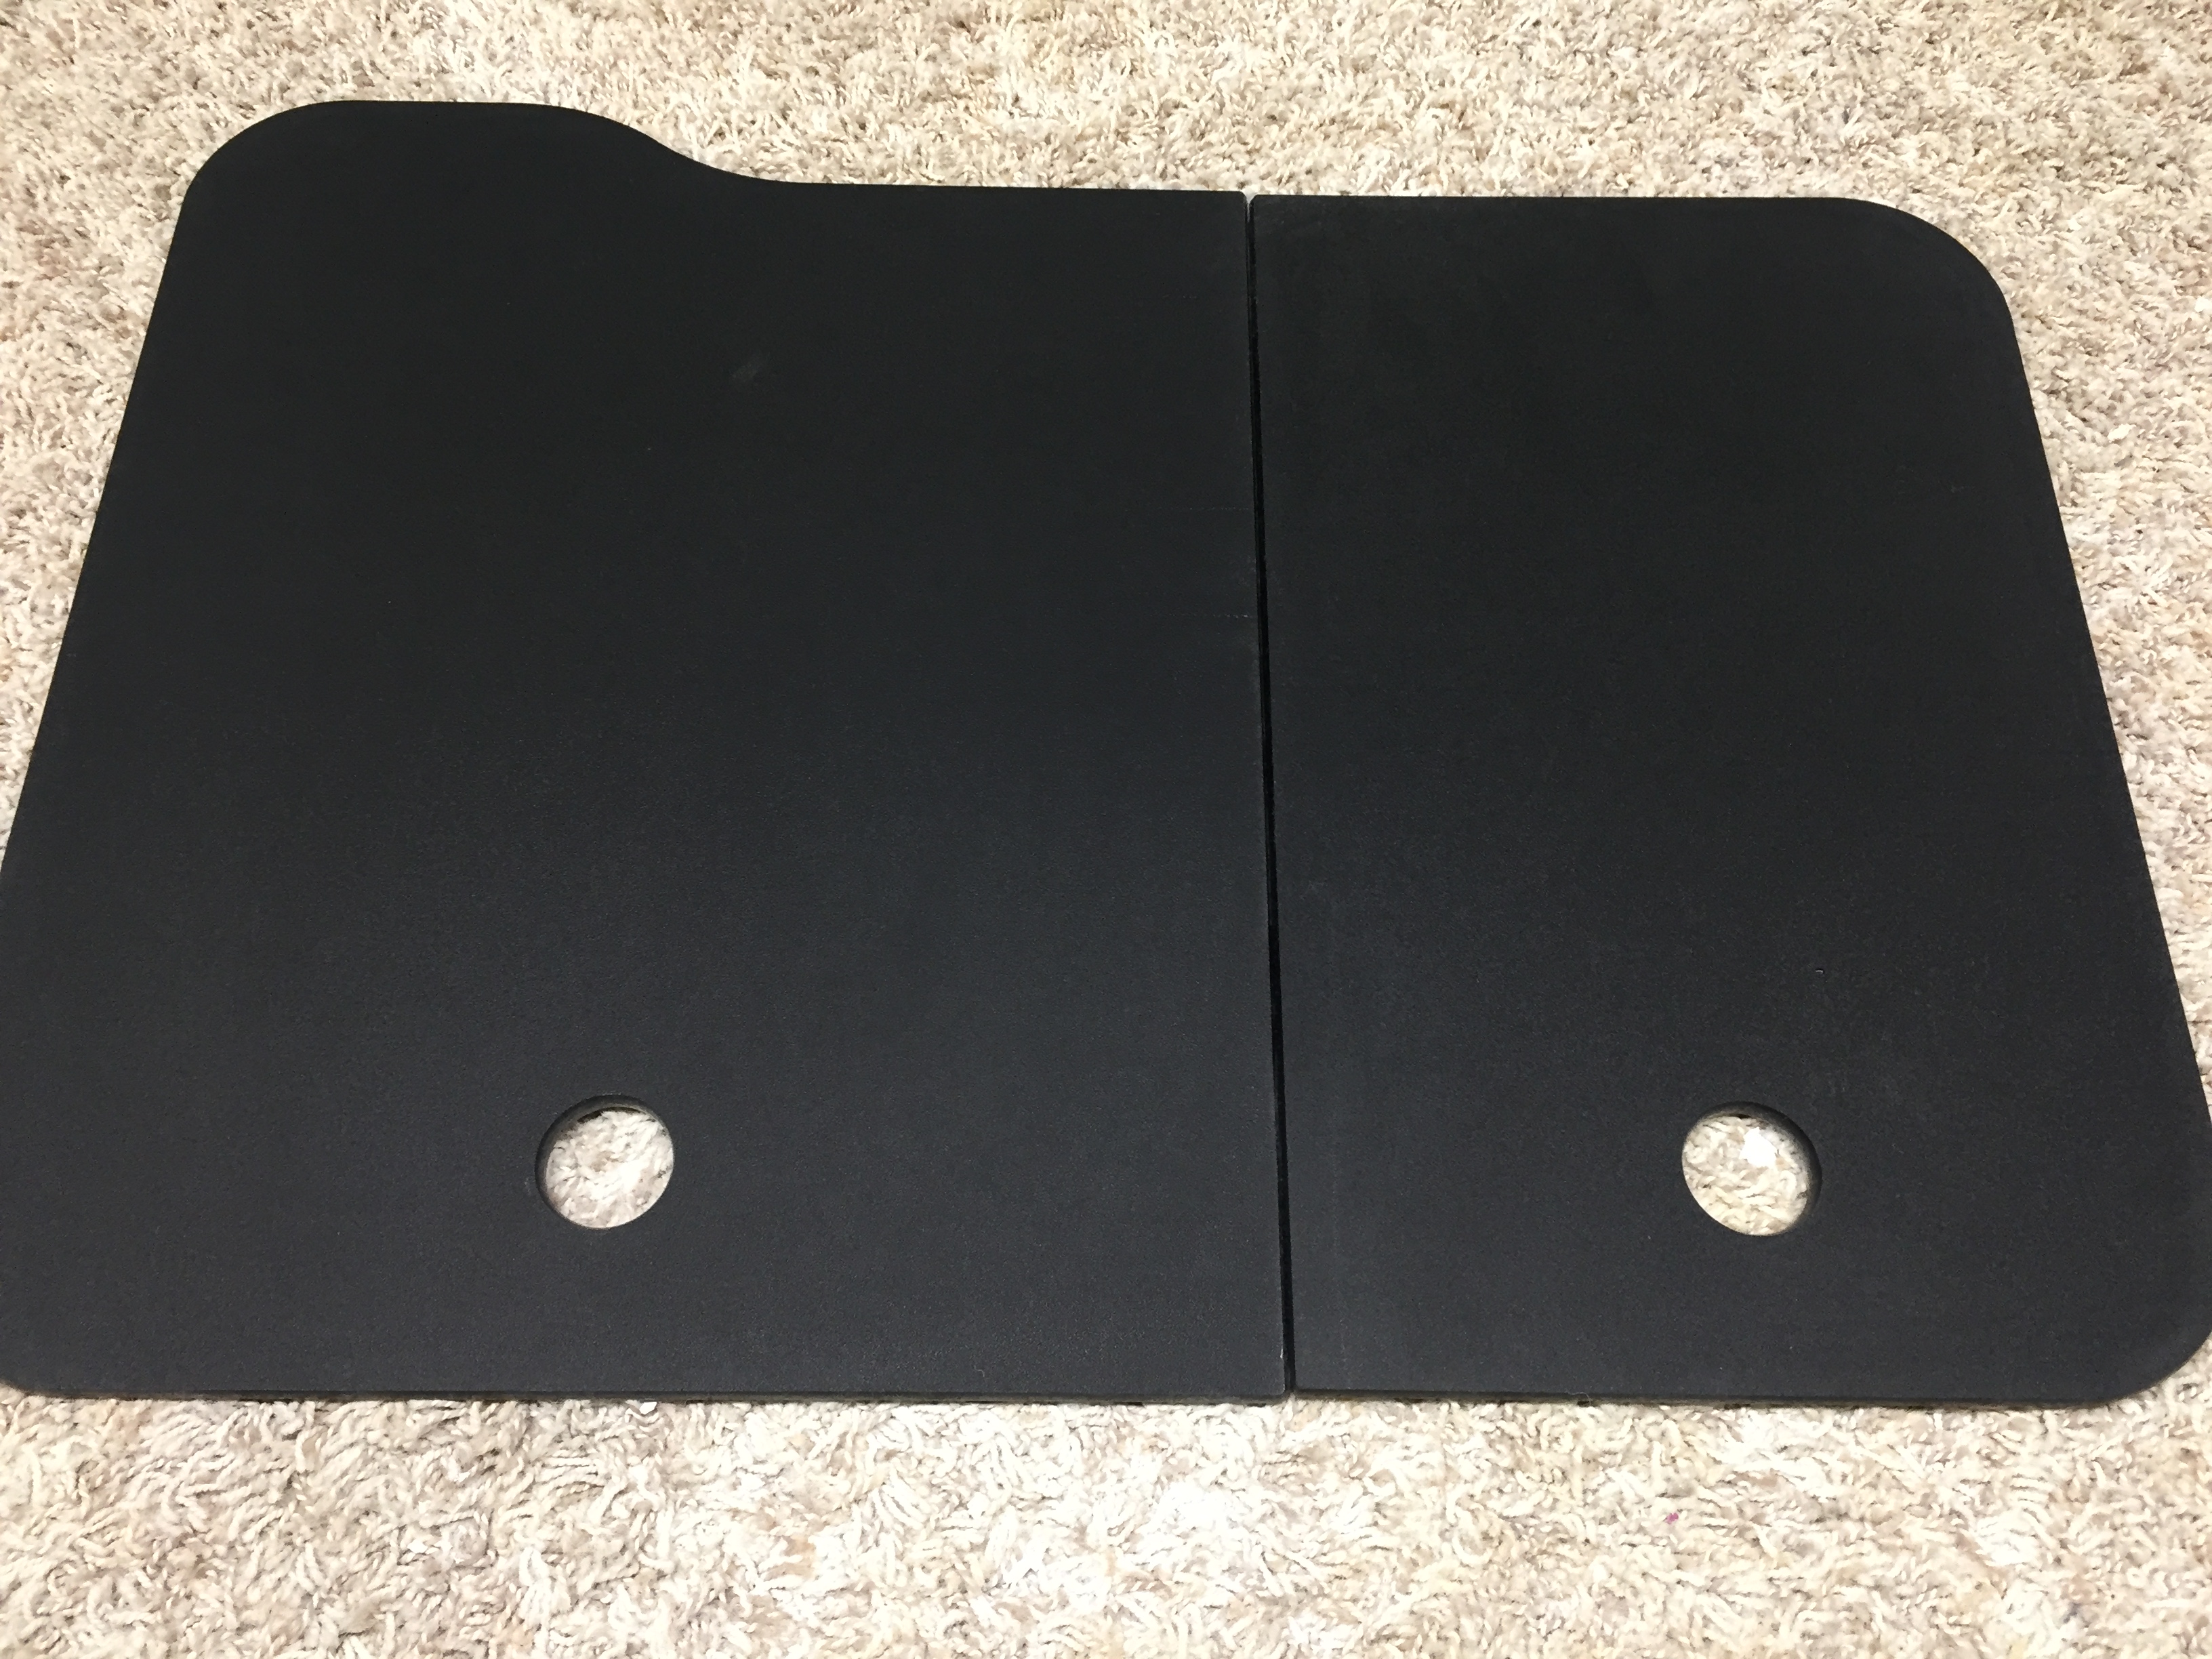 18 x 24 Sink Covers - Black - American Stonecast Products, Inc.